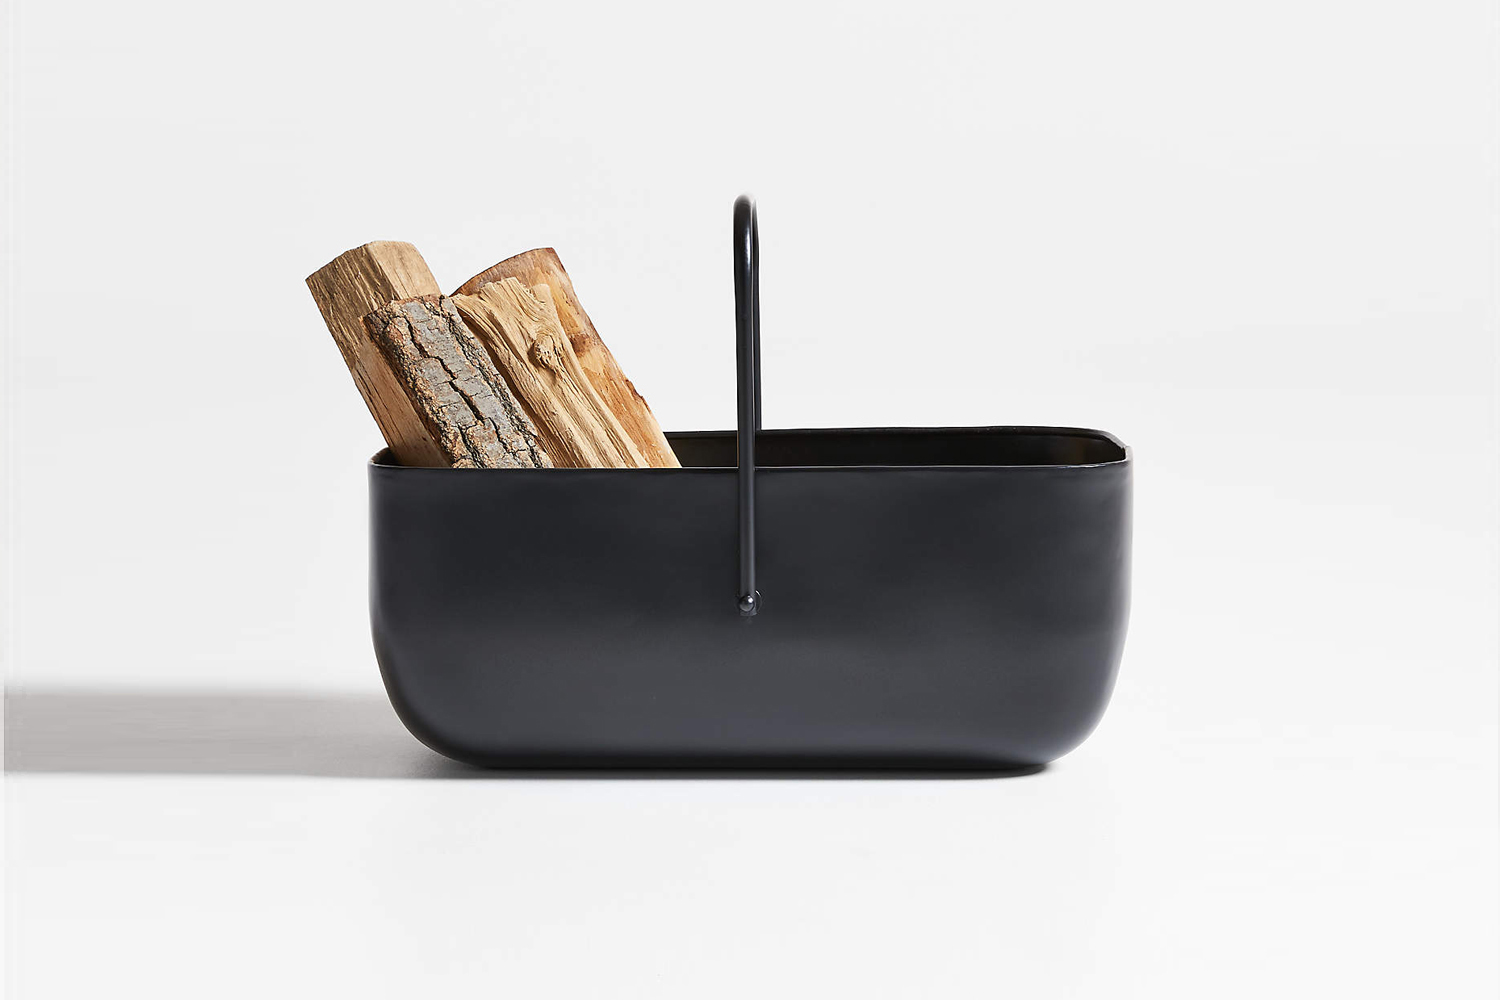 the telum black log holder, made of black iron, is \$\199 at crate & barrel. 11